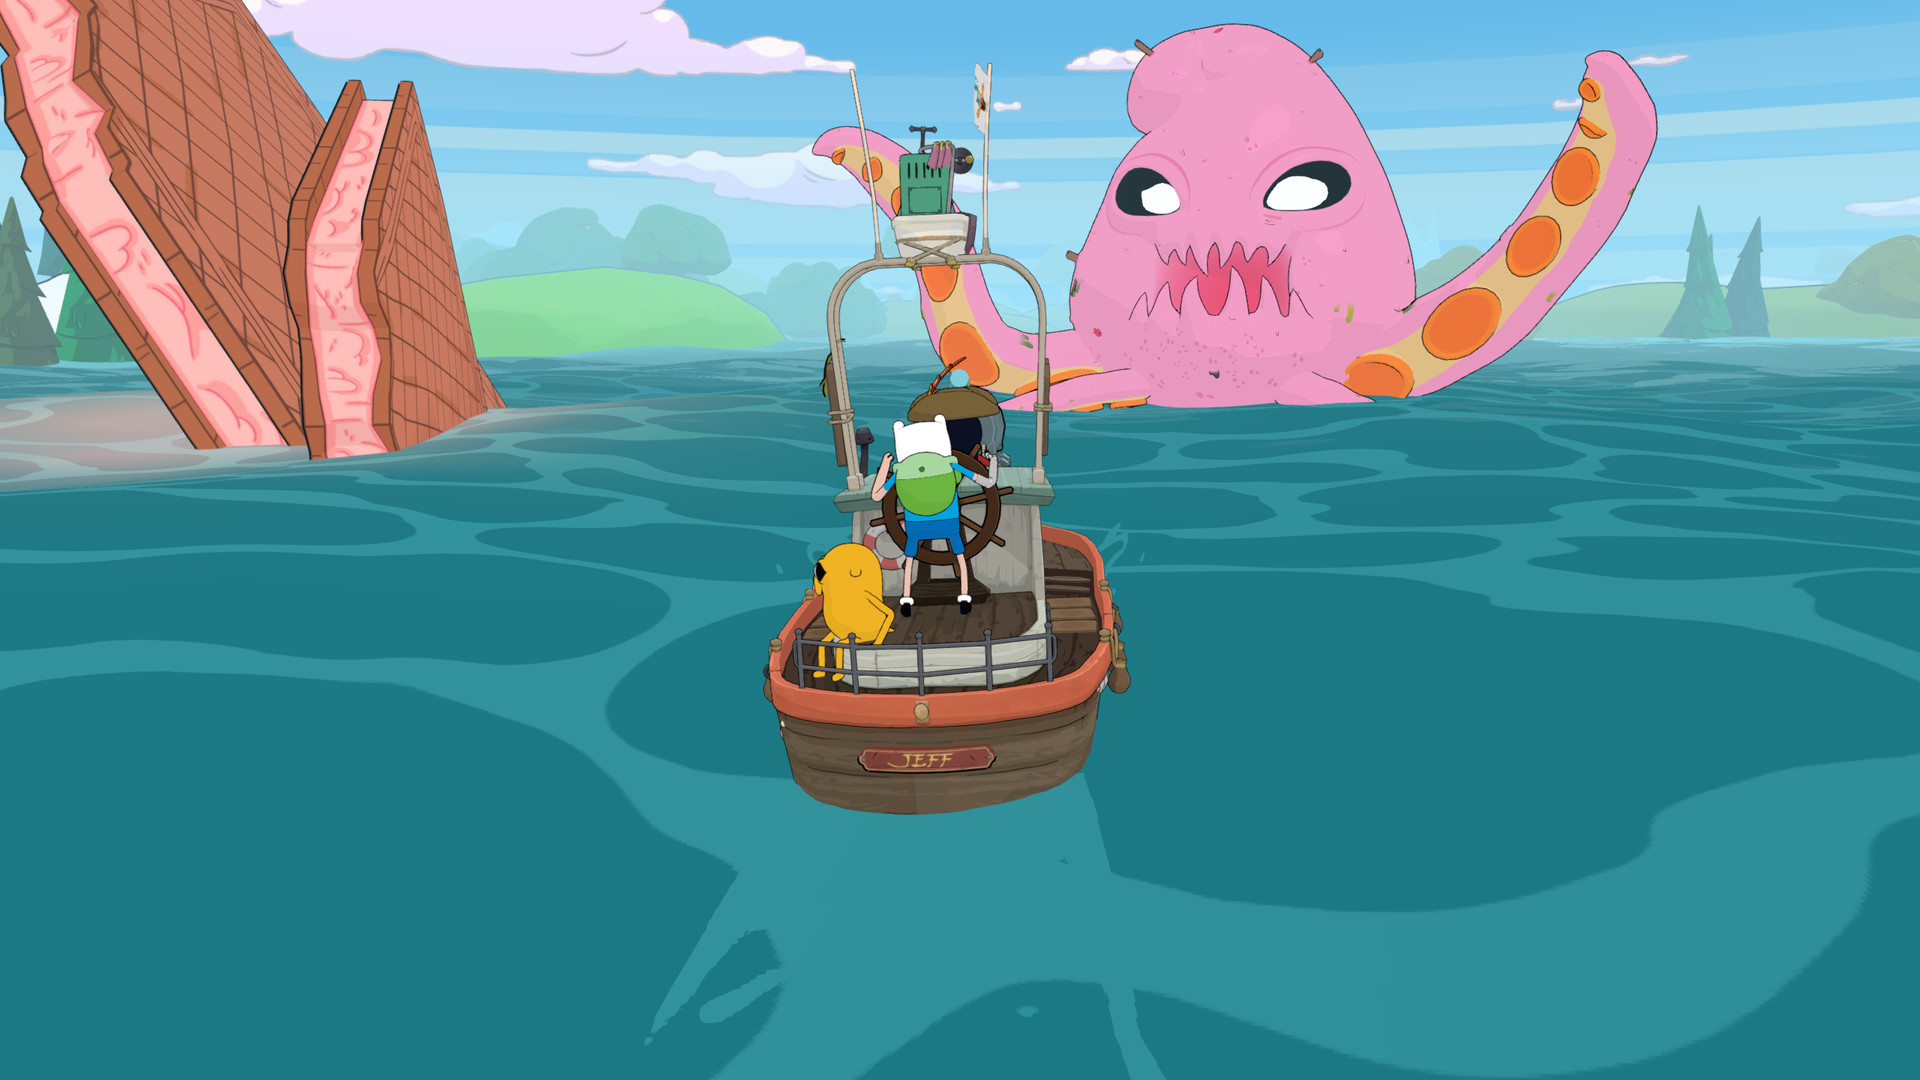 adventure time pirates of the enchiridion switch